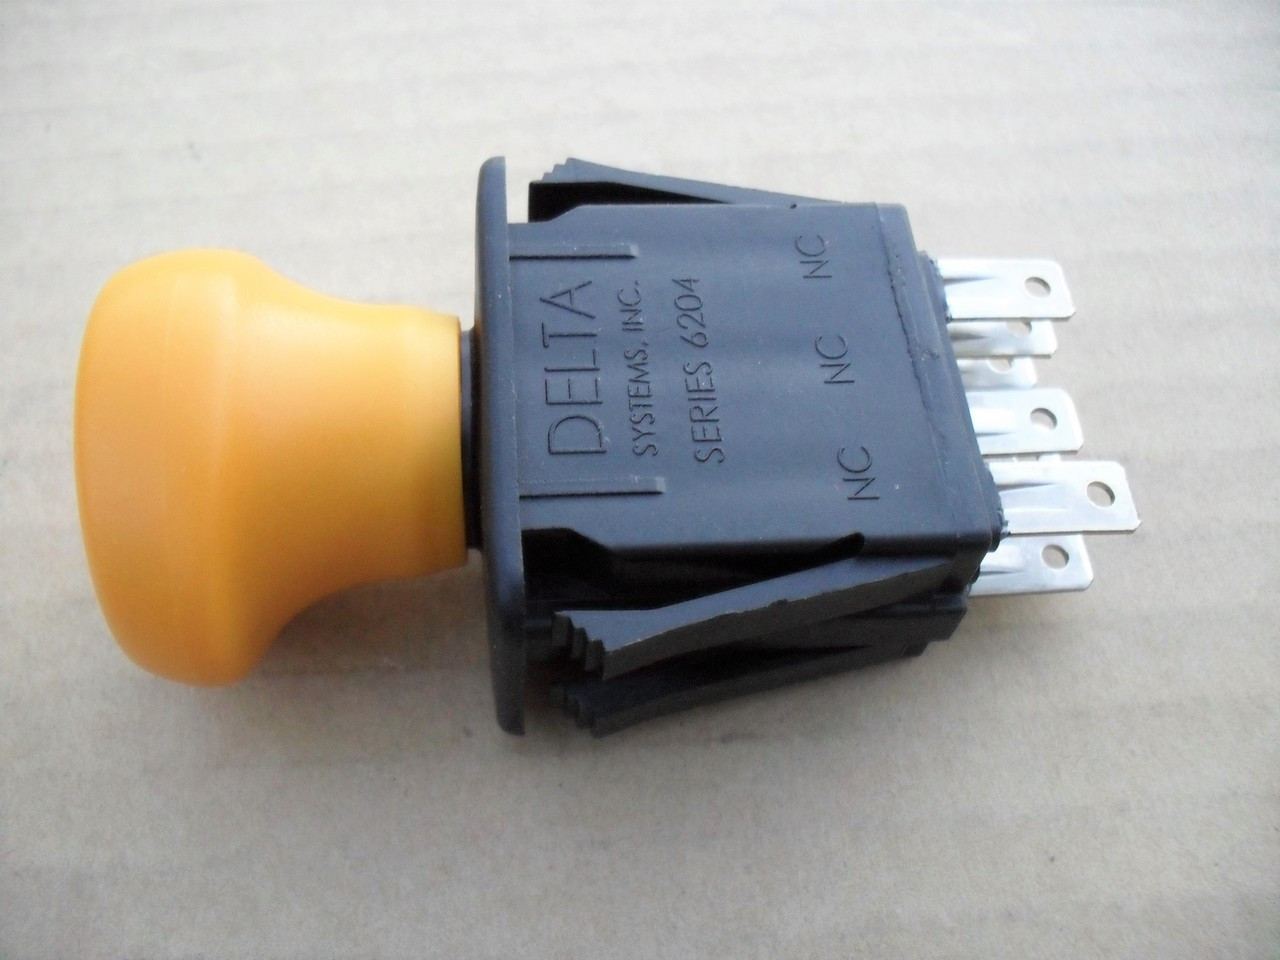 PTO Switch for Cub Cadet GT1554, GT2542, GT2544, GT2550, GT2554, SLT1550, SLT1554, Z Force 725-04175, 725-04175A, 925-04175, 925-04175A, Made In USA